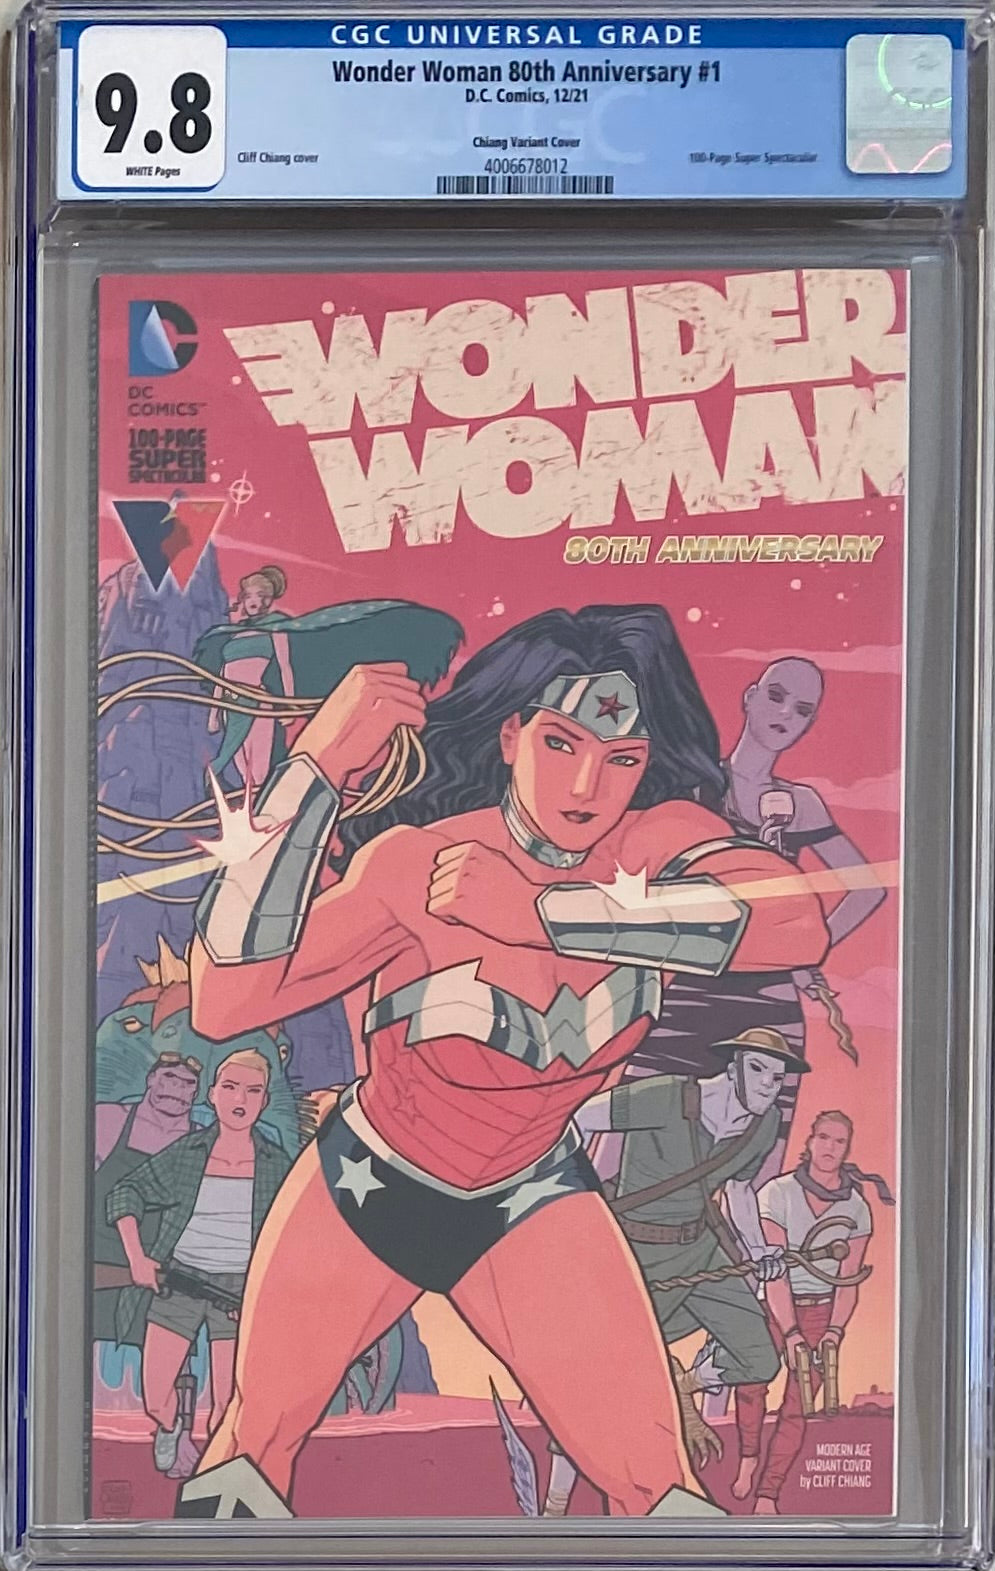 Wonder Woman 80th Anniversary 100 Page Super Spectacular #1 Chiang Variant CGC 9.8